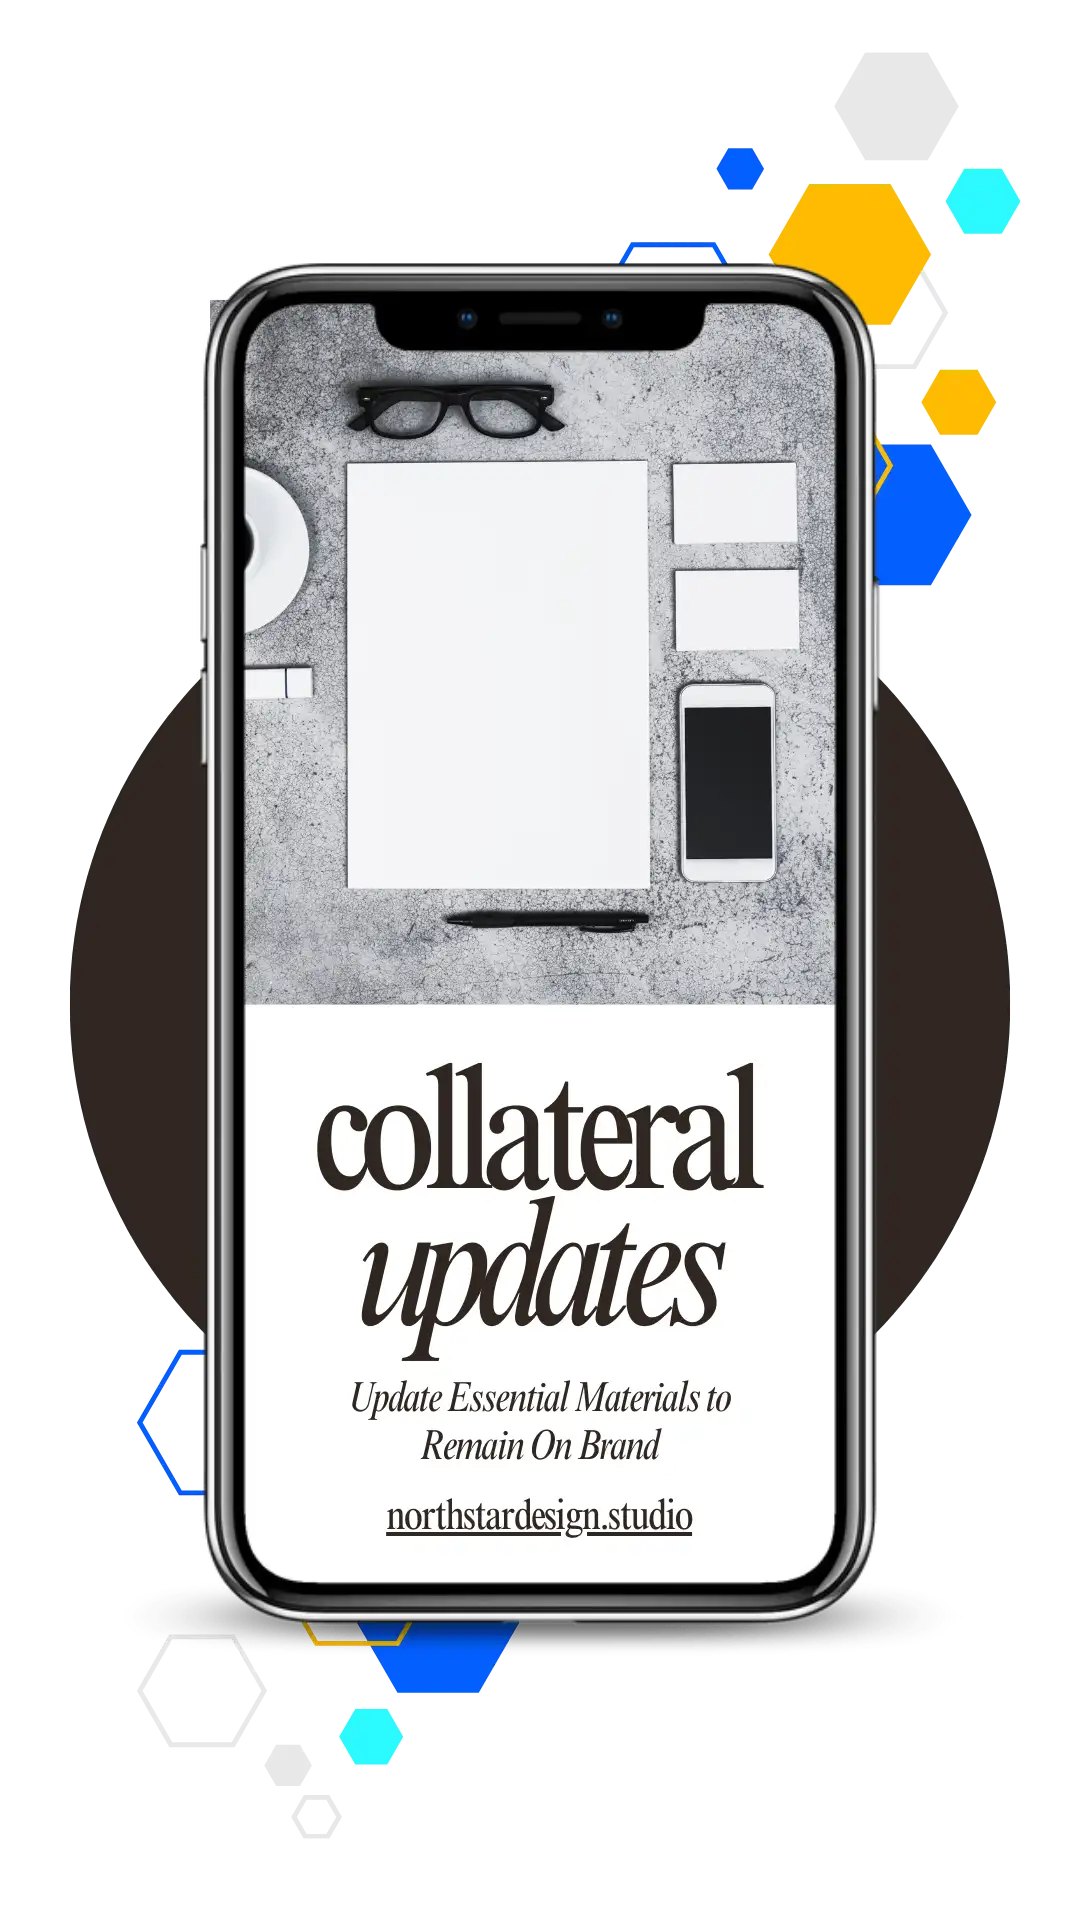 Collateral updates